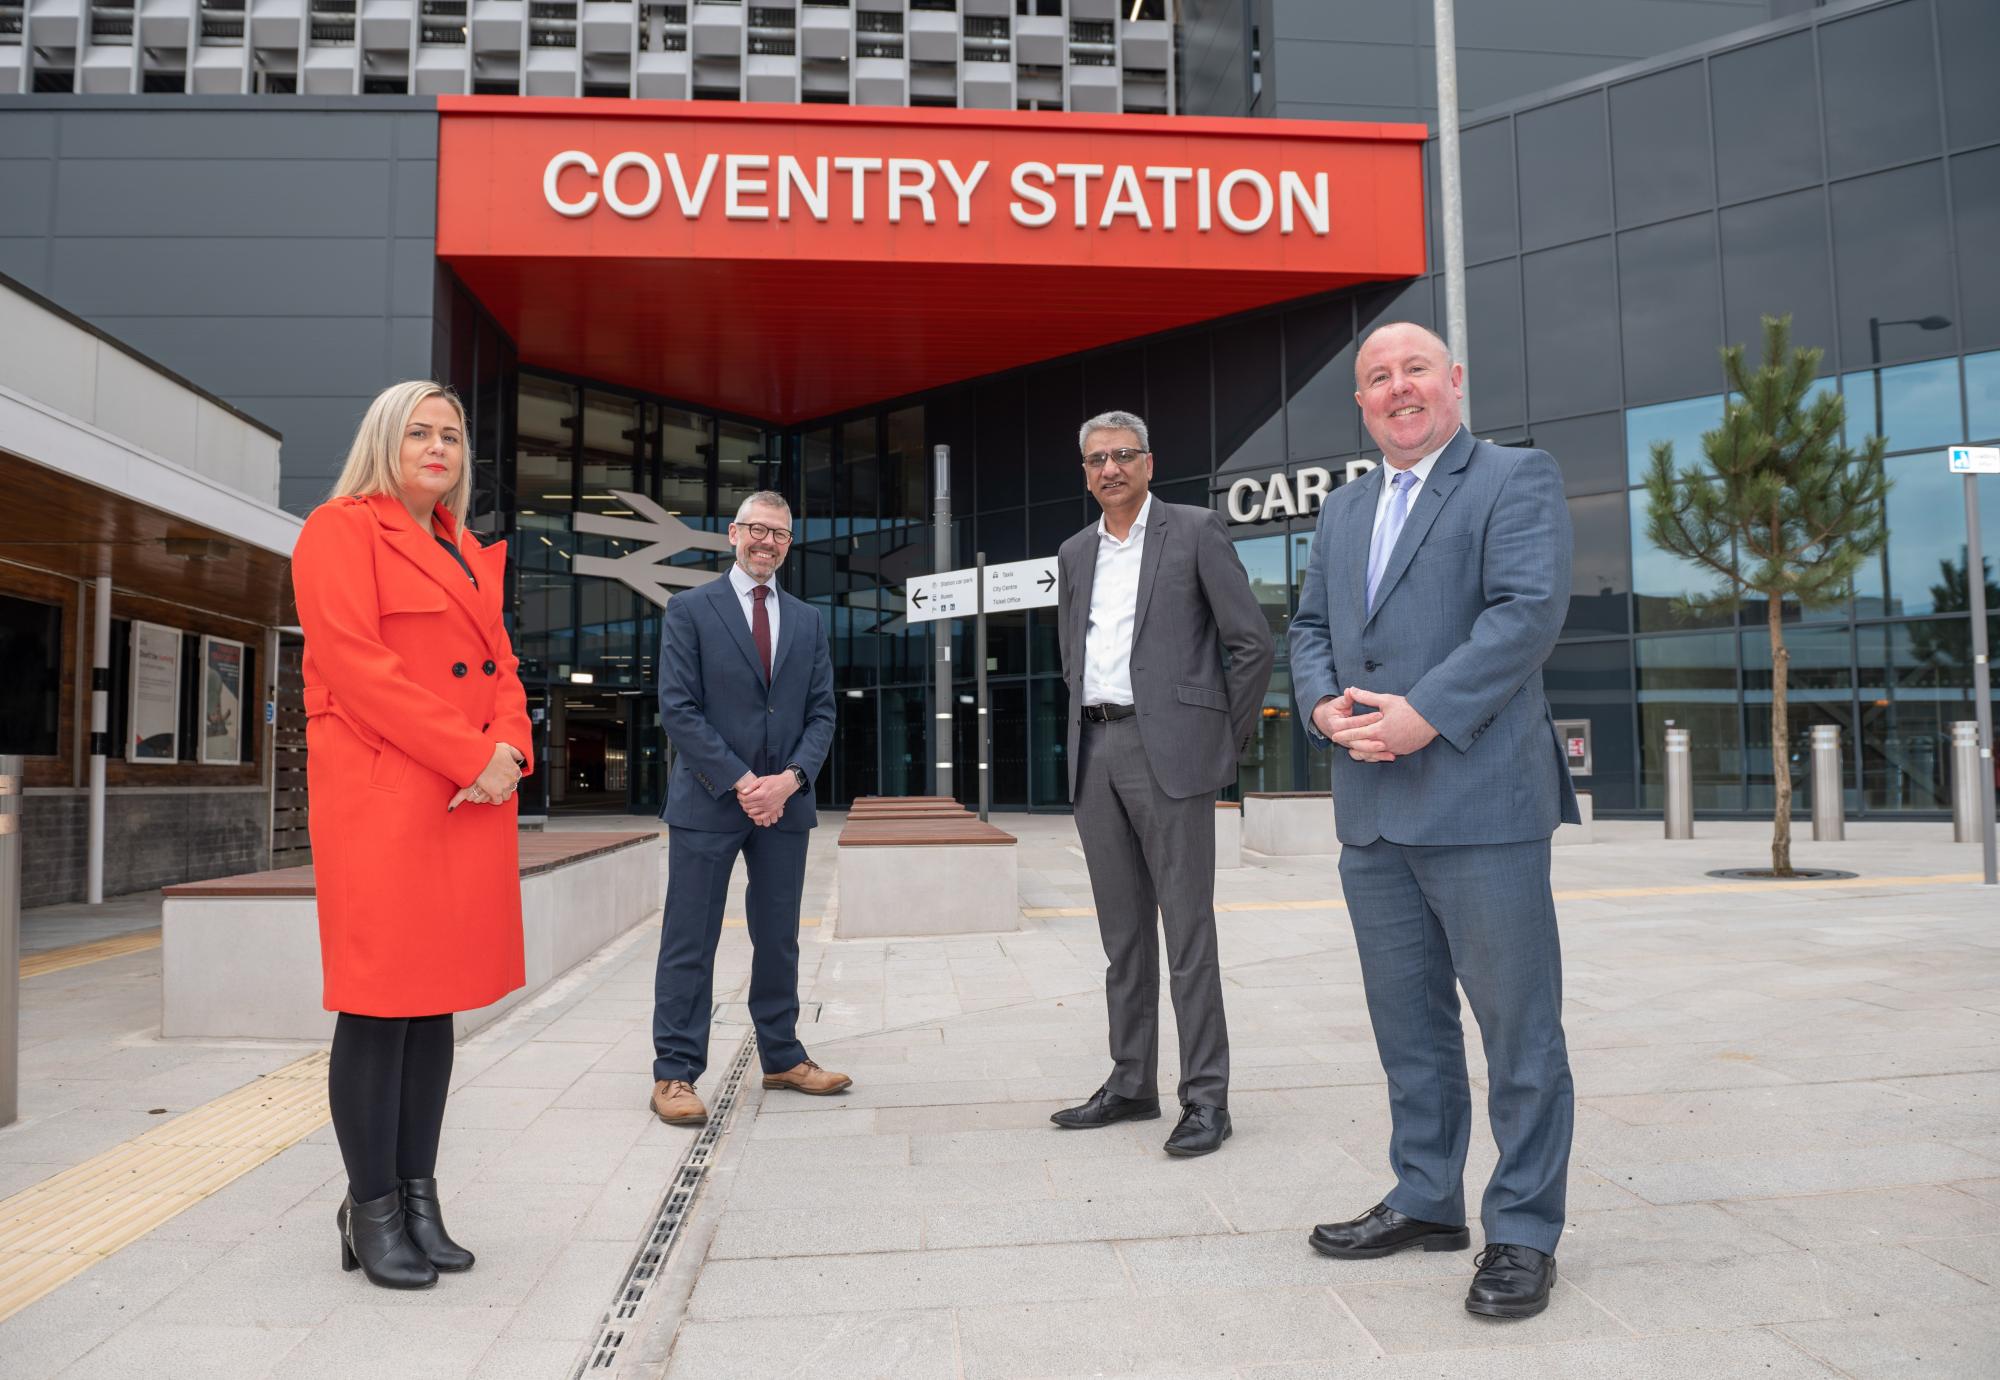 Coventry Station